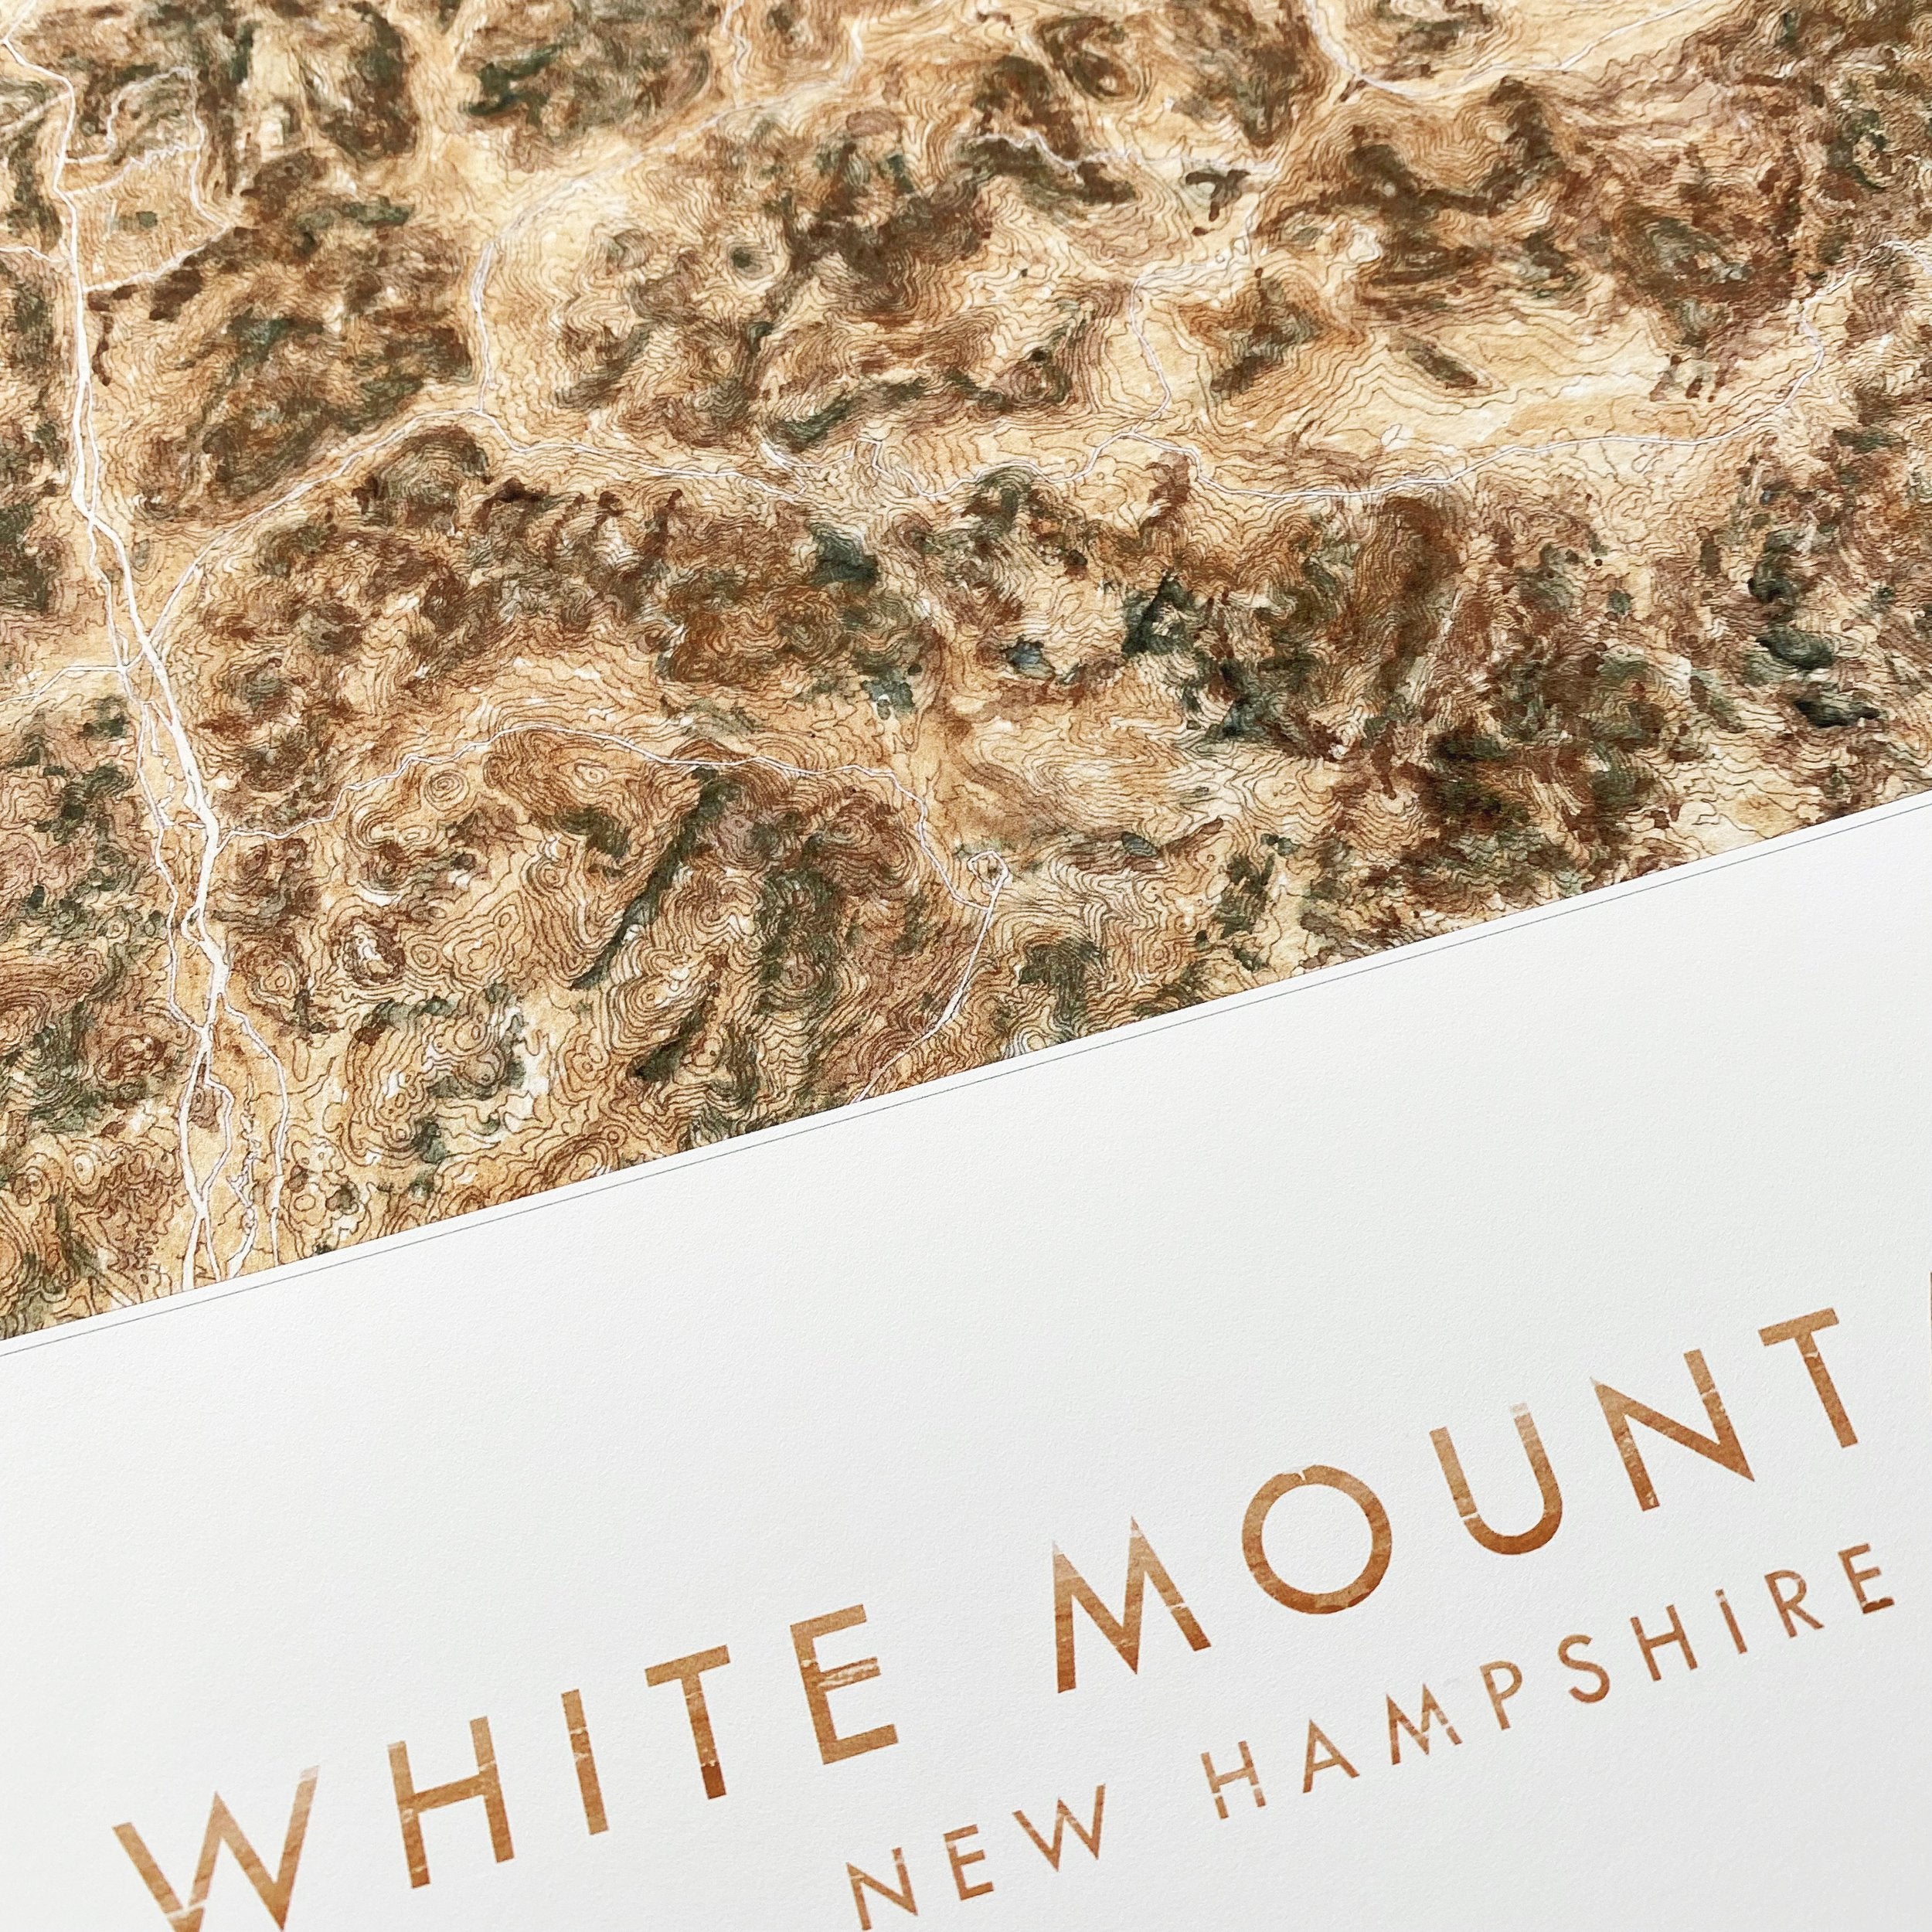 White Mountains NEW HAMPSHIRE Topographical Watercolor Map: PRINT   (Browns)